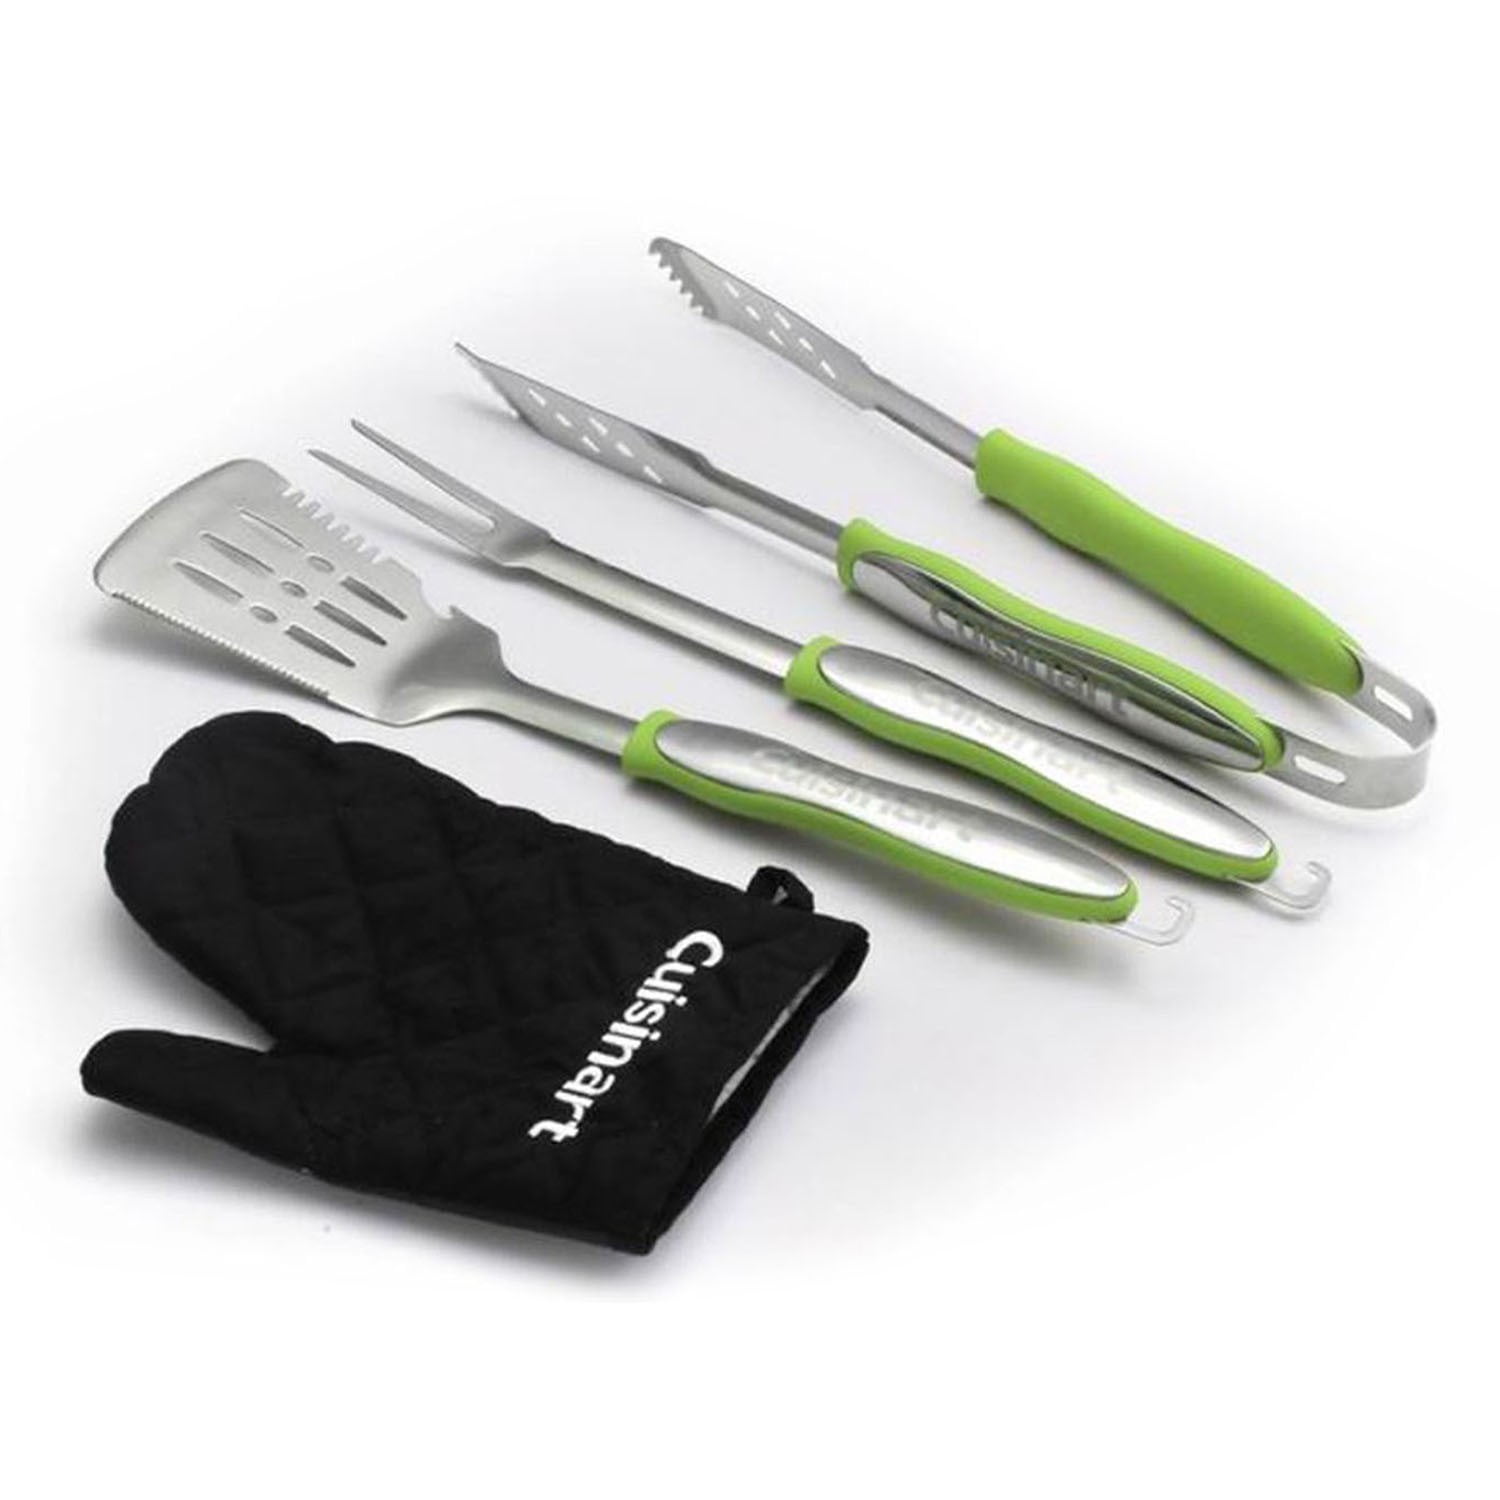 Cuisinart Cgs-134 Grilling Tool Set With Grill Glove Red 3-Piece 